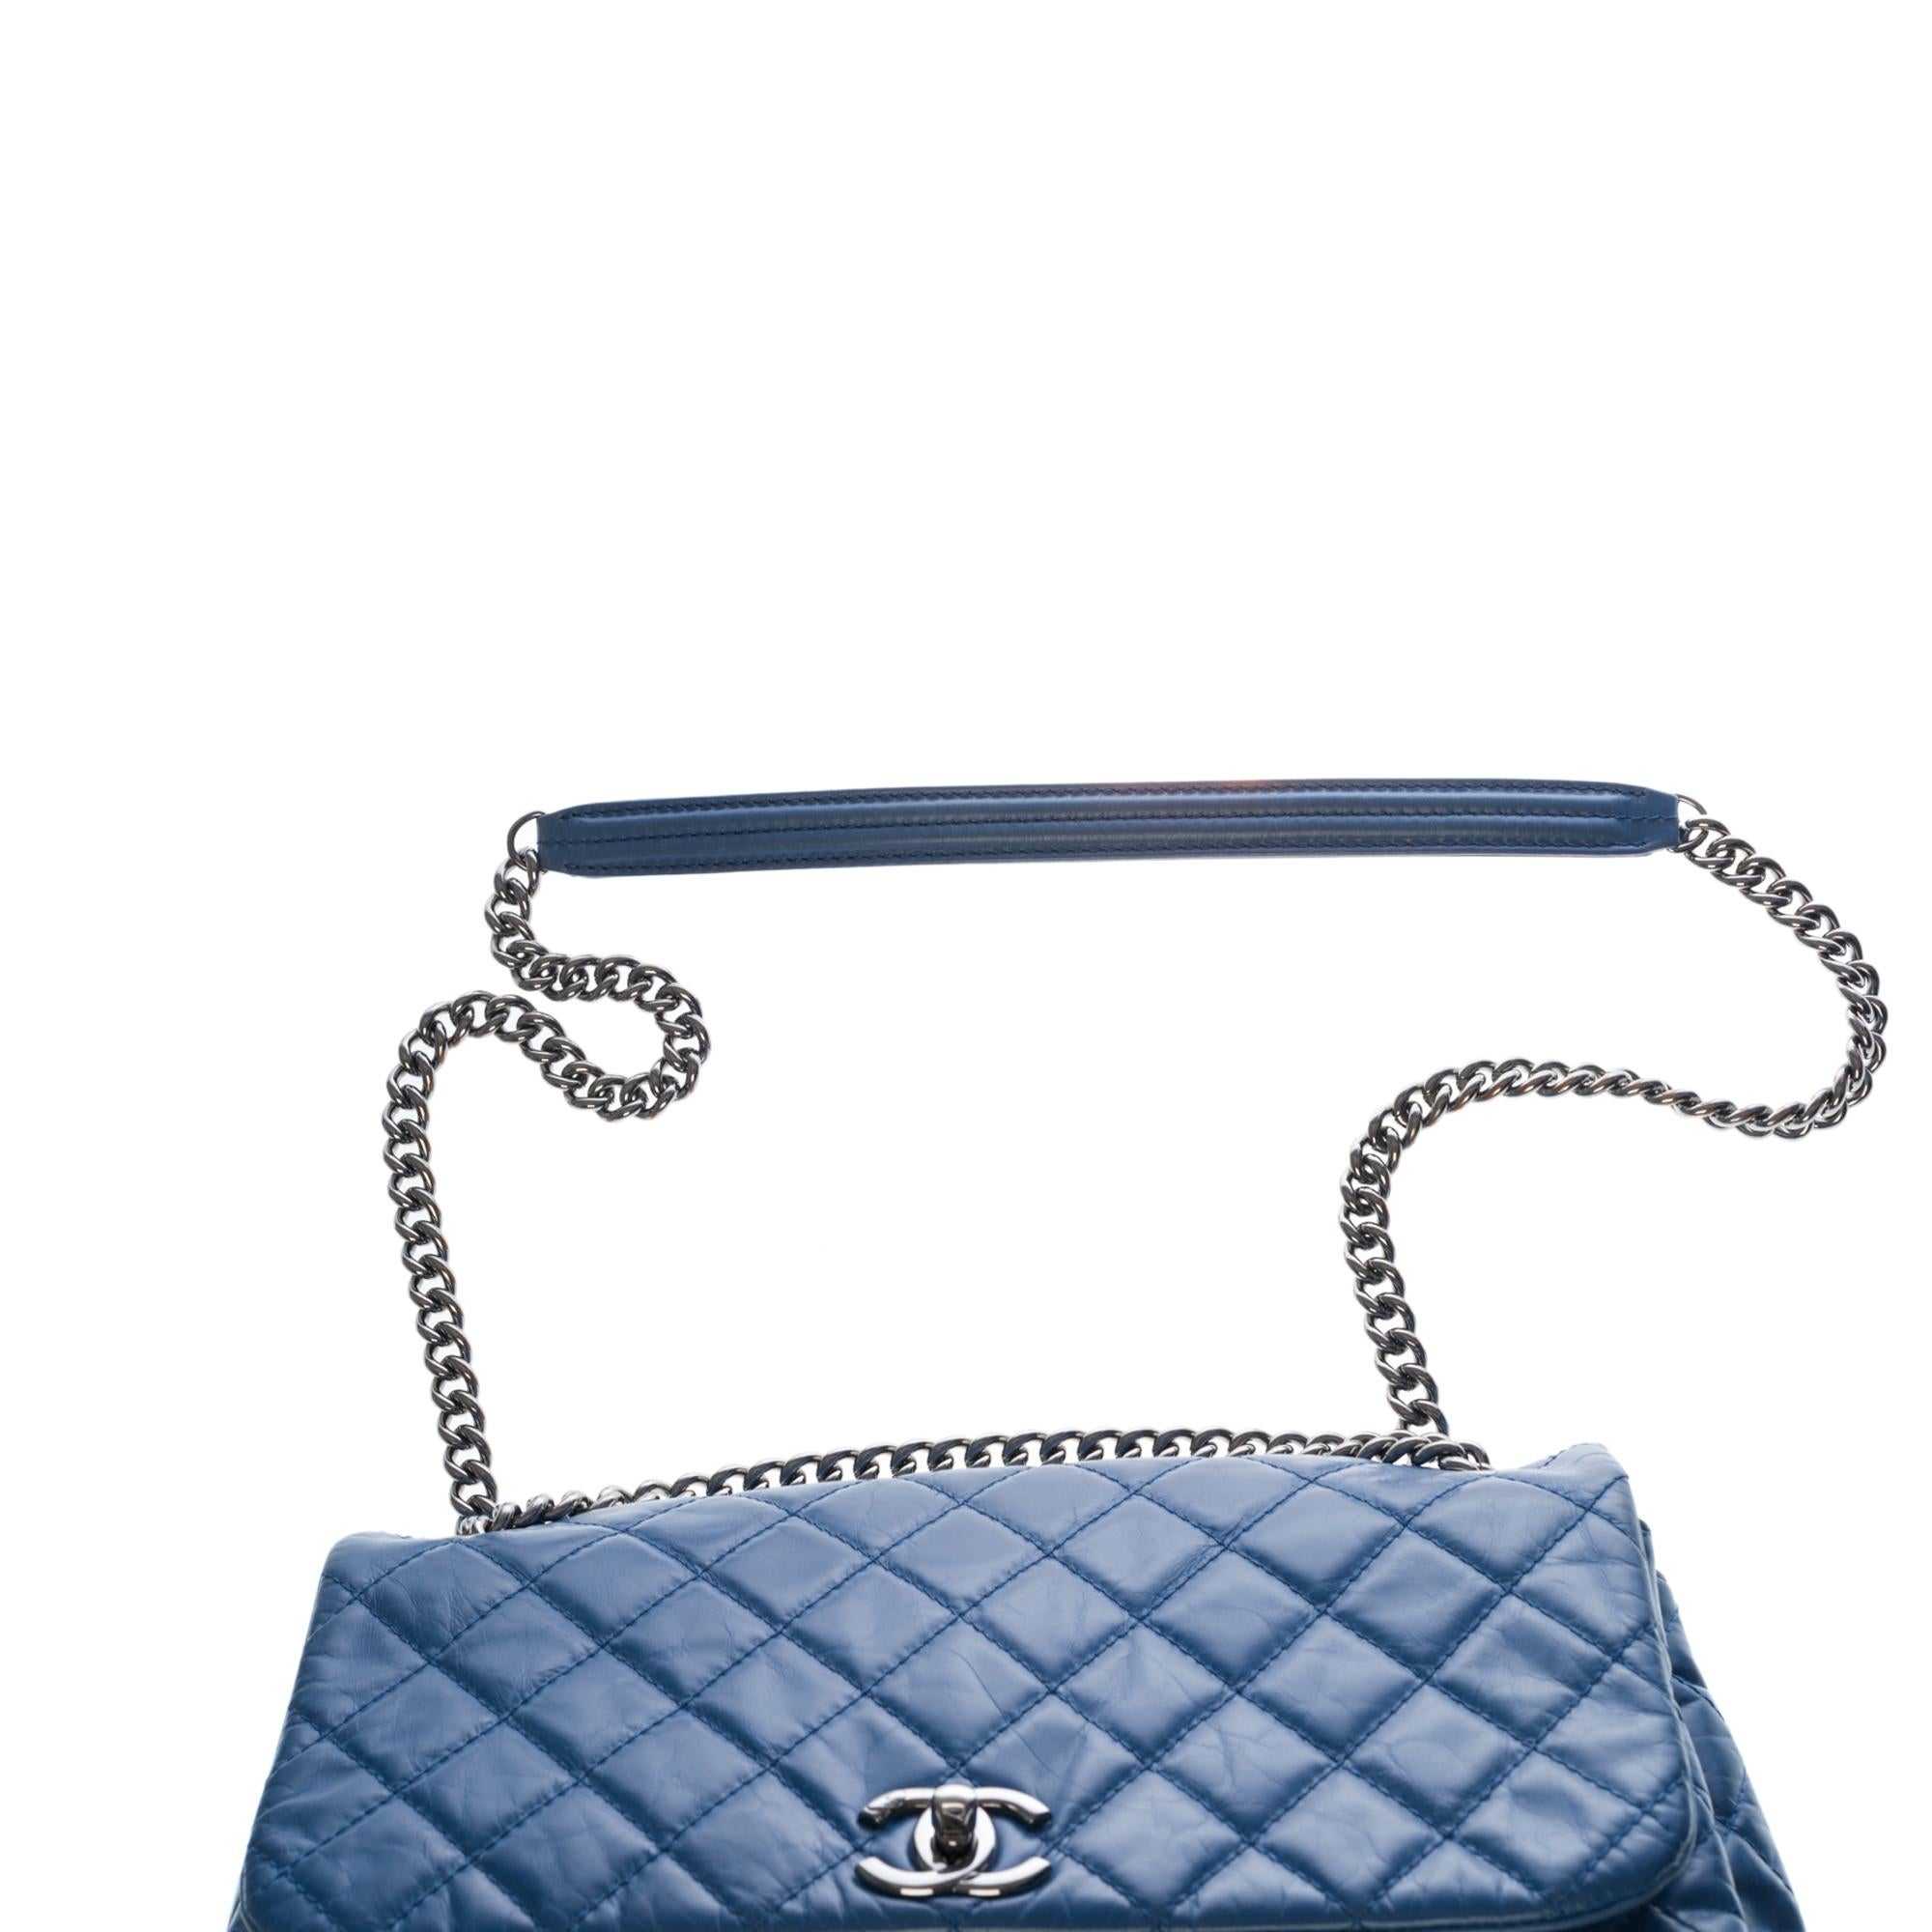 Women's Chanel Classic Maxi Flap shoulder bag in blue quilted lambskin, SHW